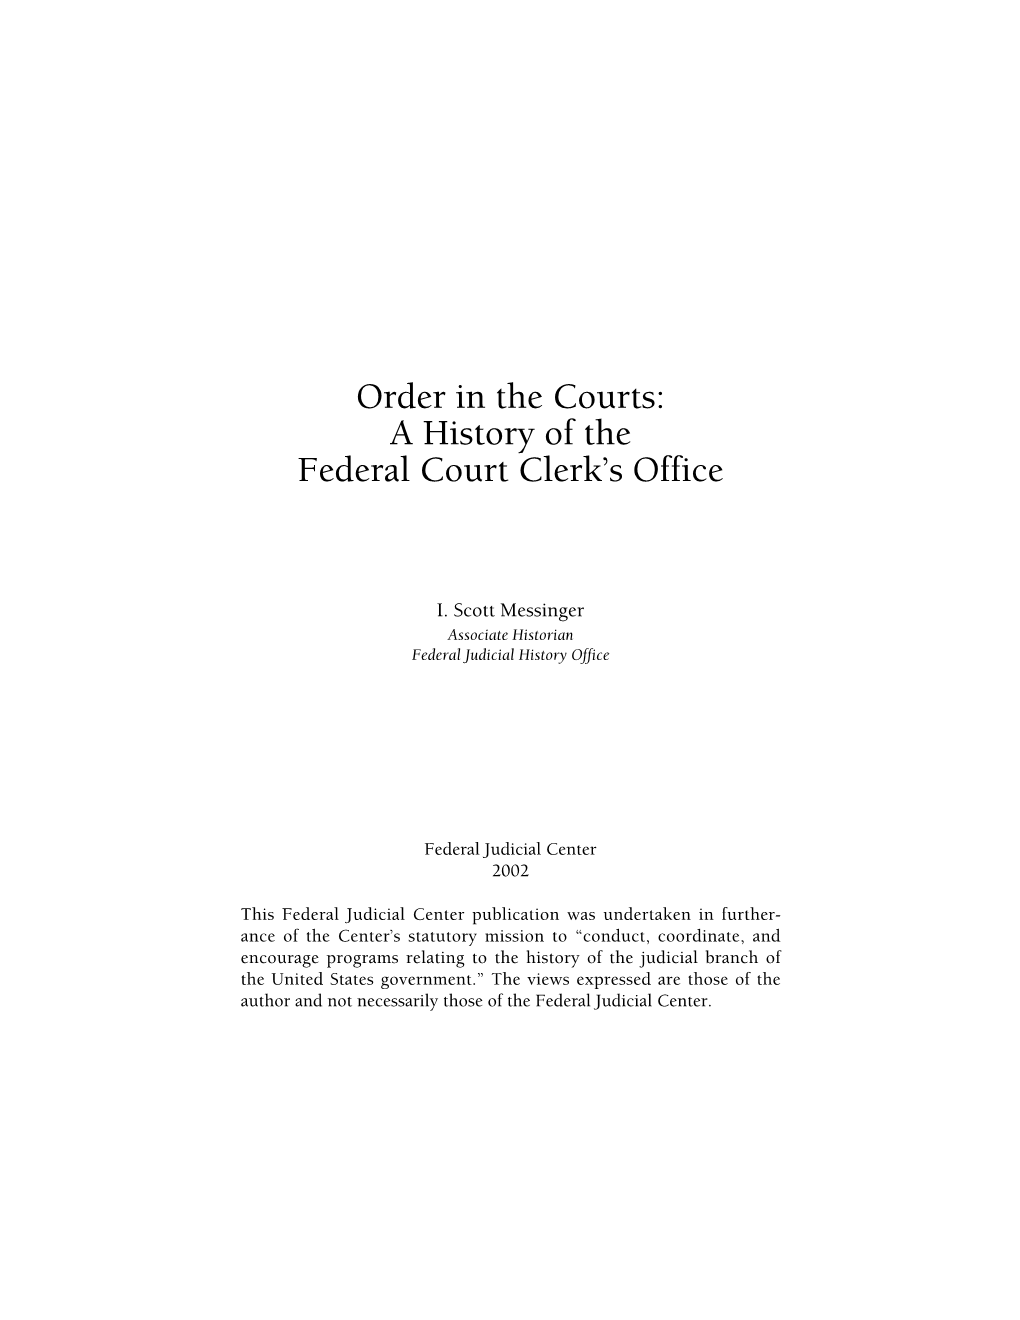 A History of the Federal Court Clerk's Office